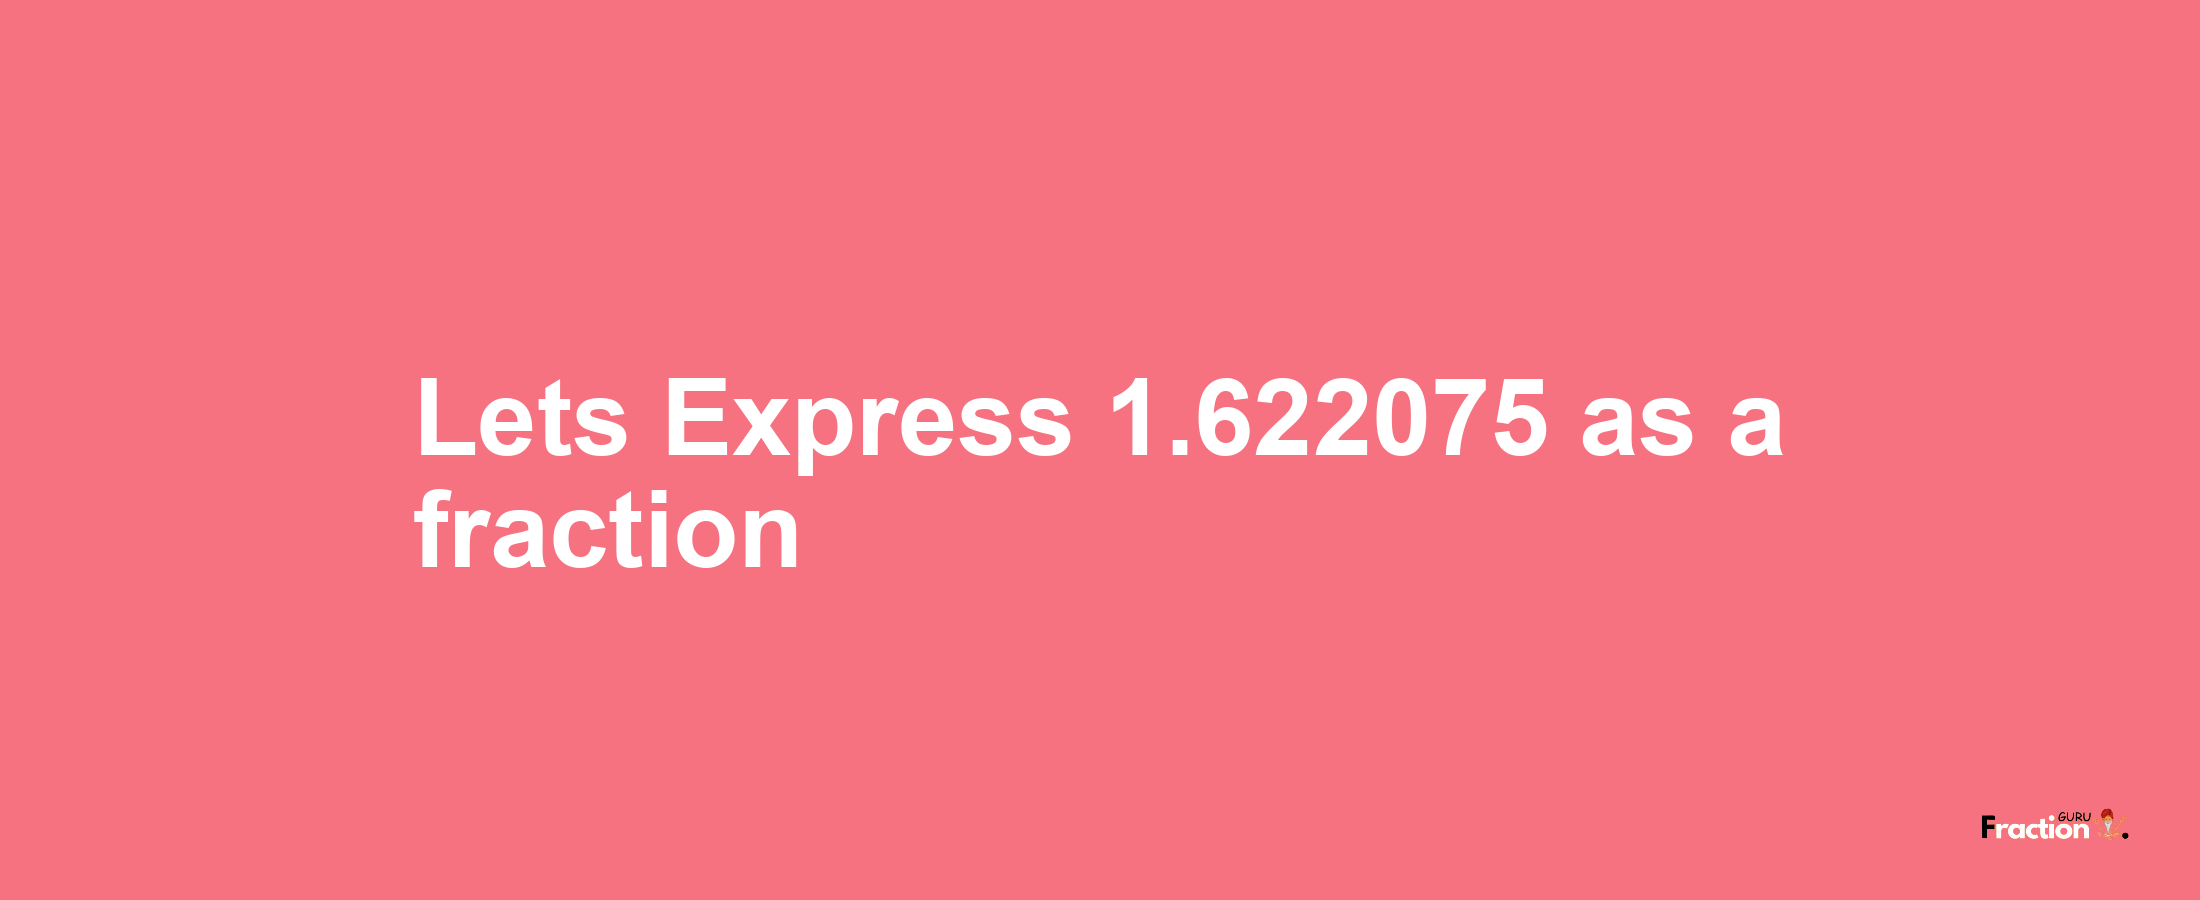 Lets Express 1.622075 as afraction